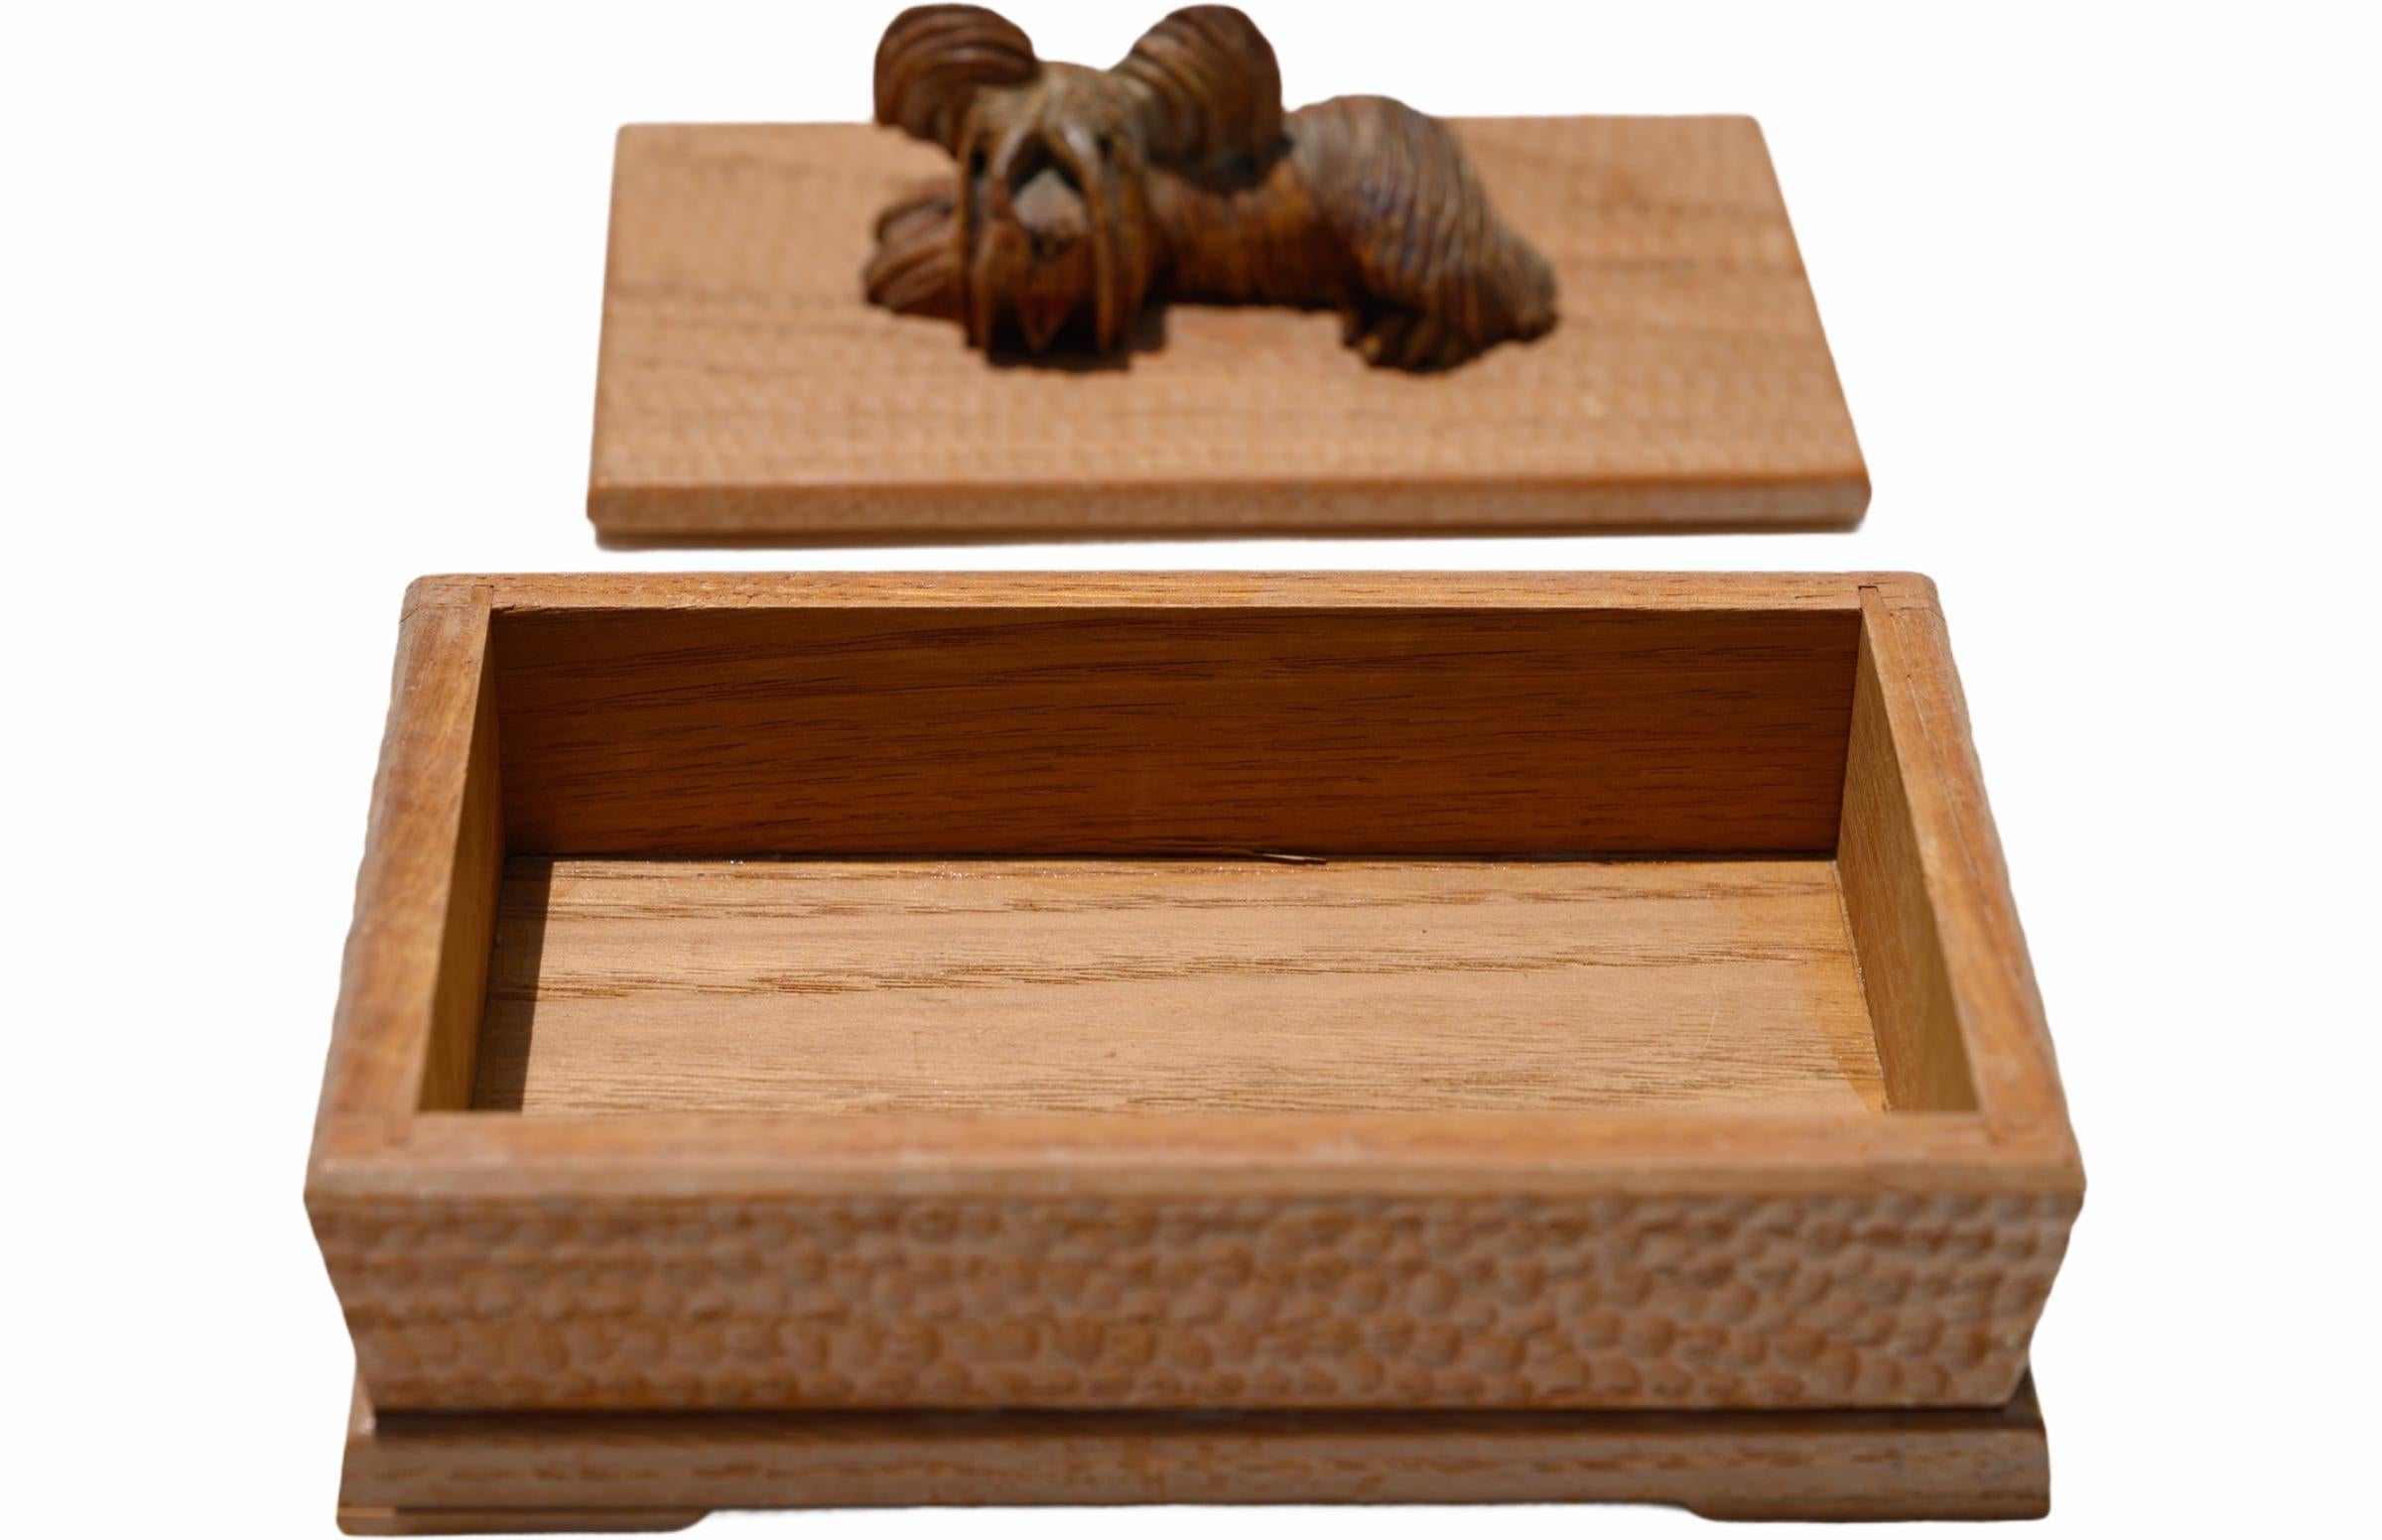 A beautifully hand carved wooden keepsake box with an adorable sculpted dog on top of the lid. 
The exterior of the box is stylistically carved with deep cuts and indentions in a repeating pattern.

Measures: 6 1/4